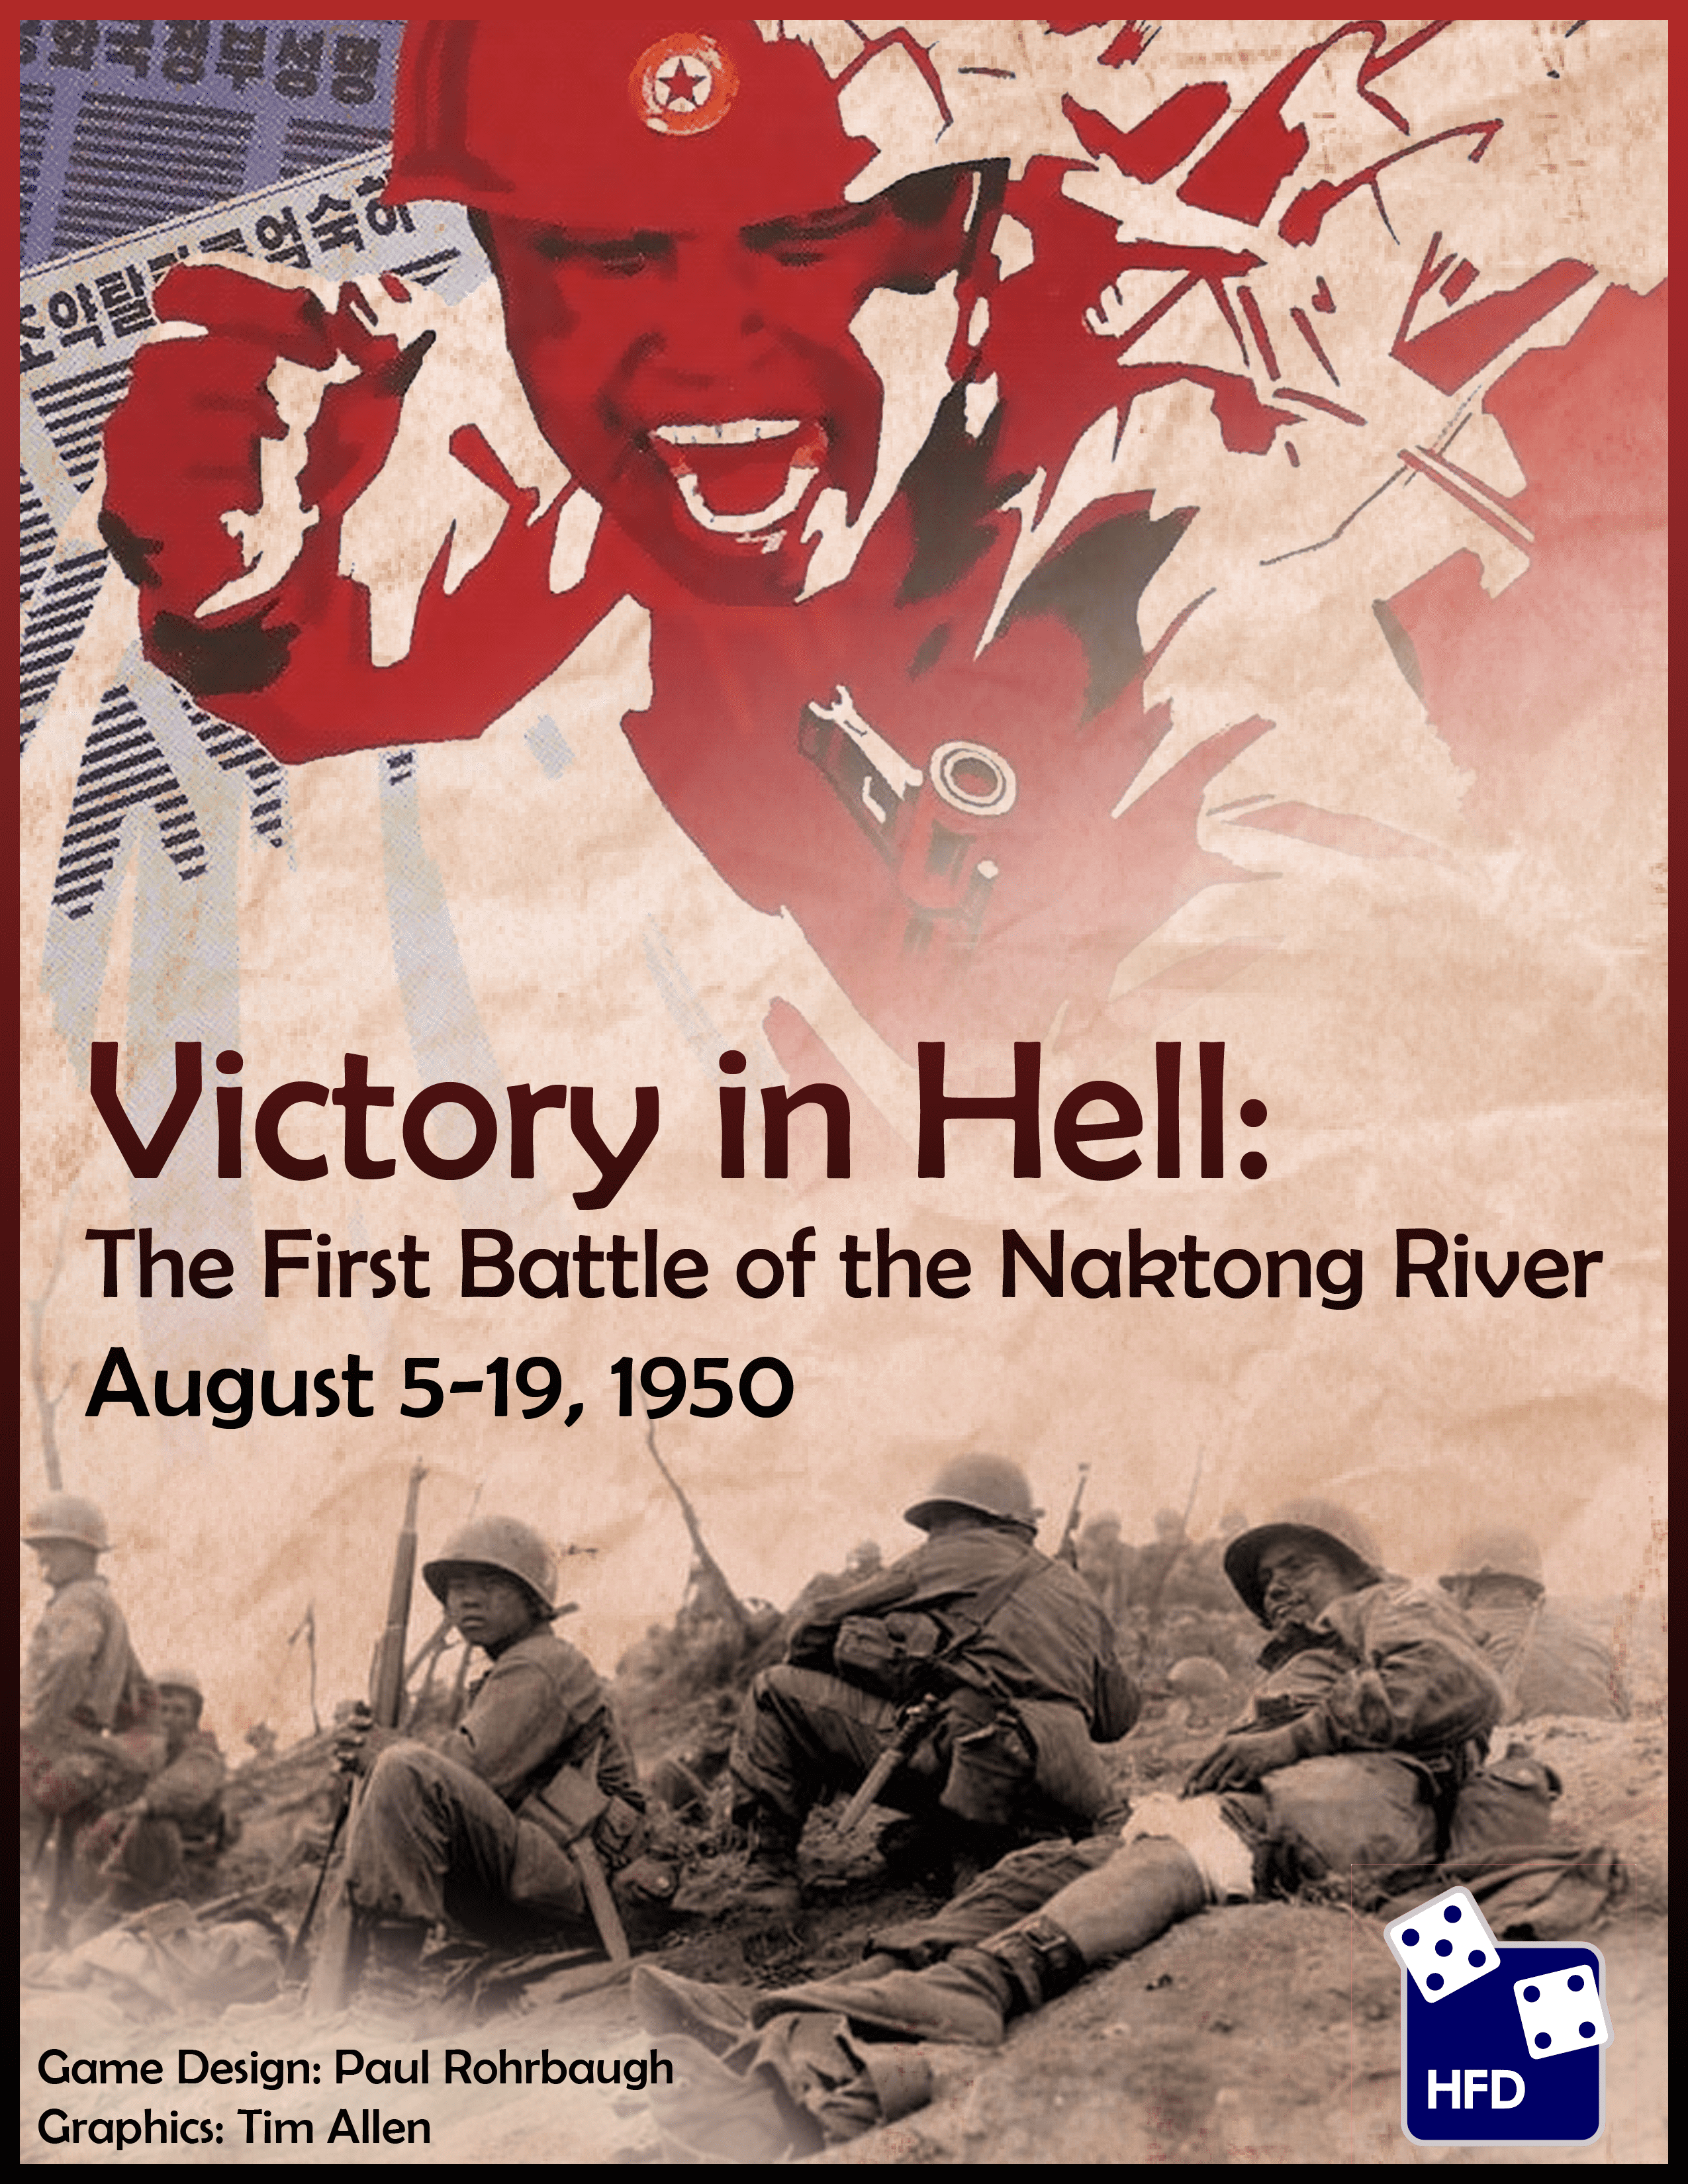 Victory in Hell: The First Battle of the Naktong River, August 5-19, 1950